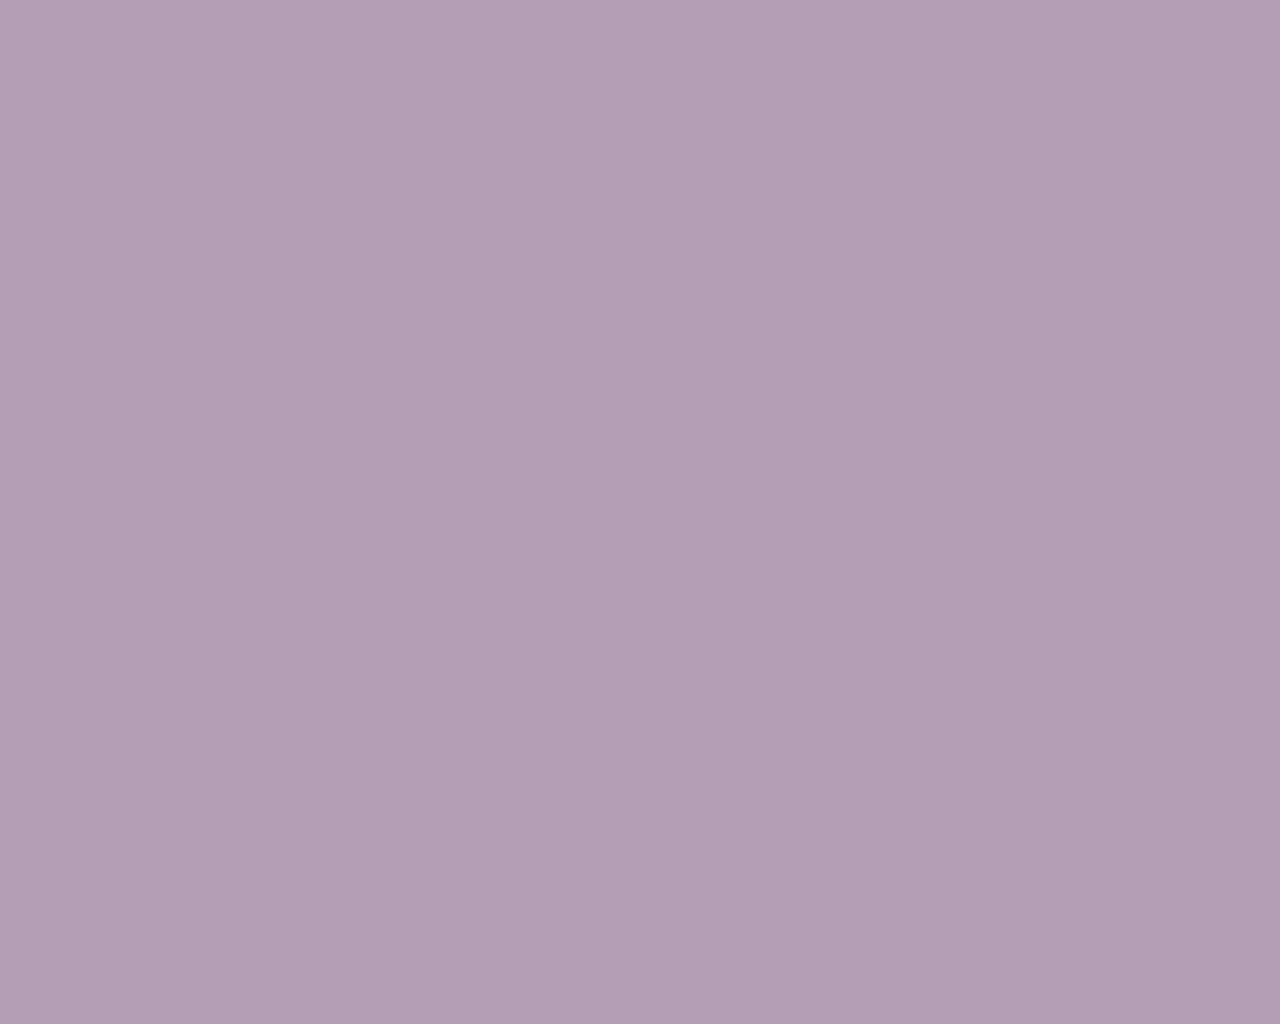 Free 1280x1024 resolution Pastel Purple solid color background view